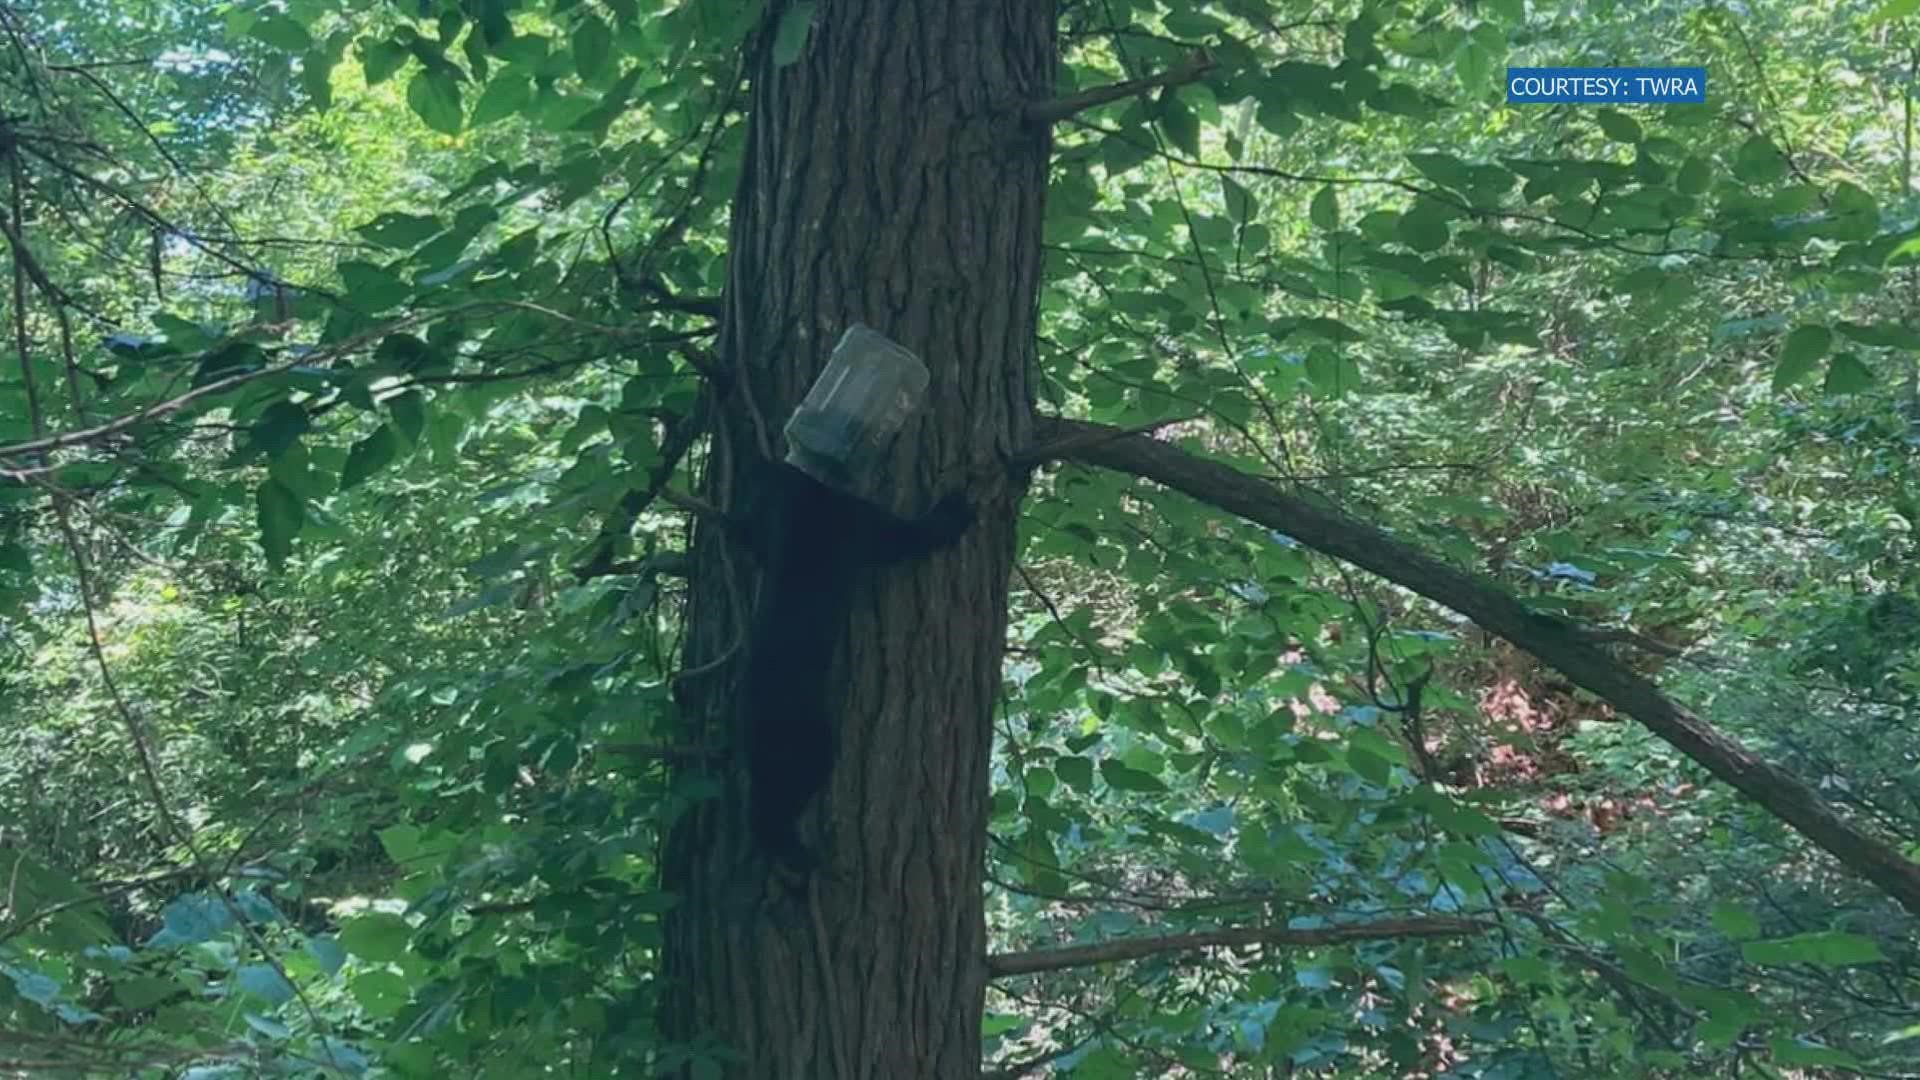 A bear was recently spotted in Wears VAlley with a plastic container stuck on its head. The TWRA and Appalachian Bear Rescue helped remove it.